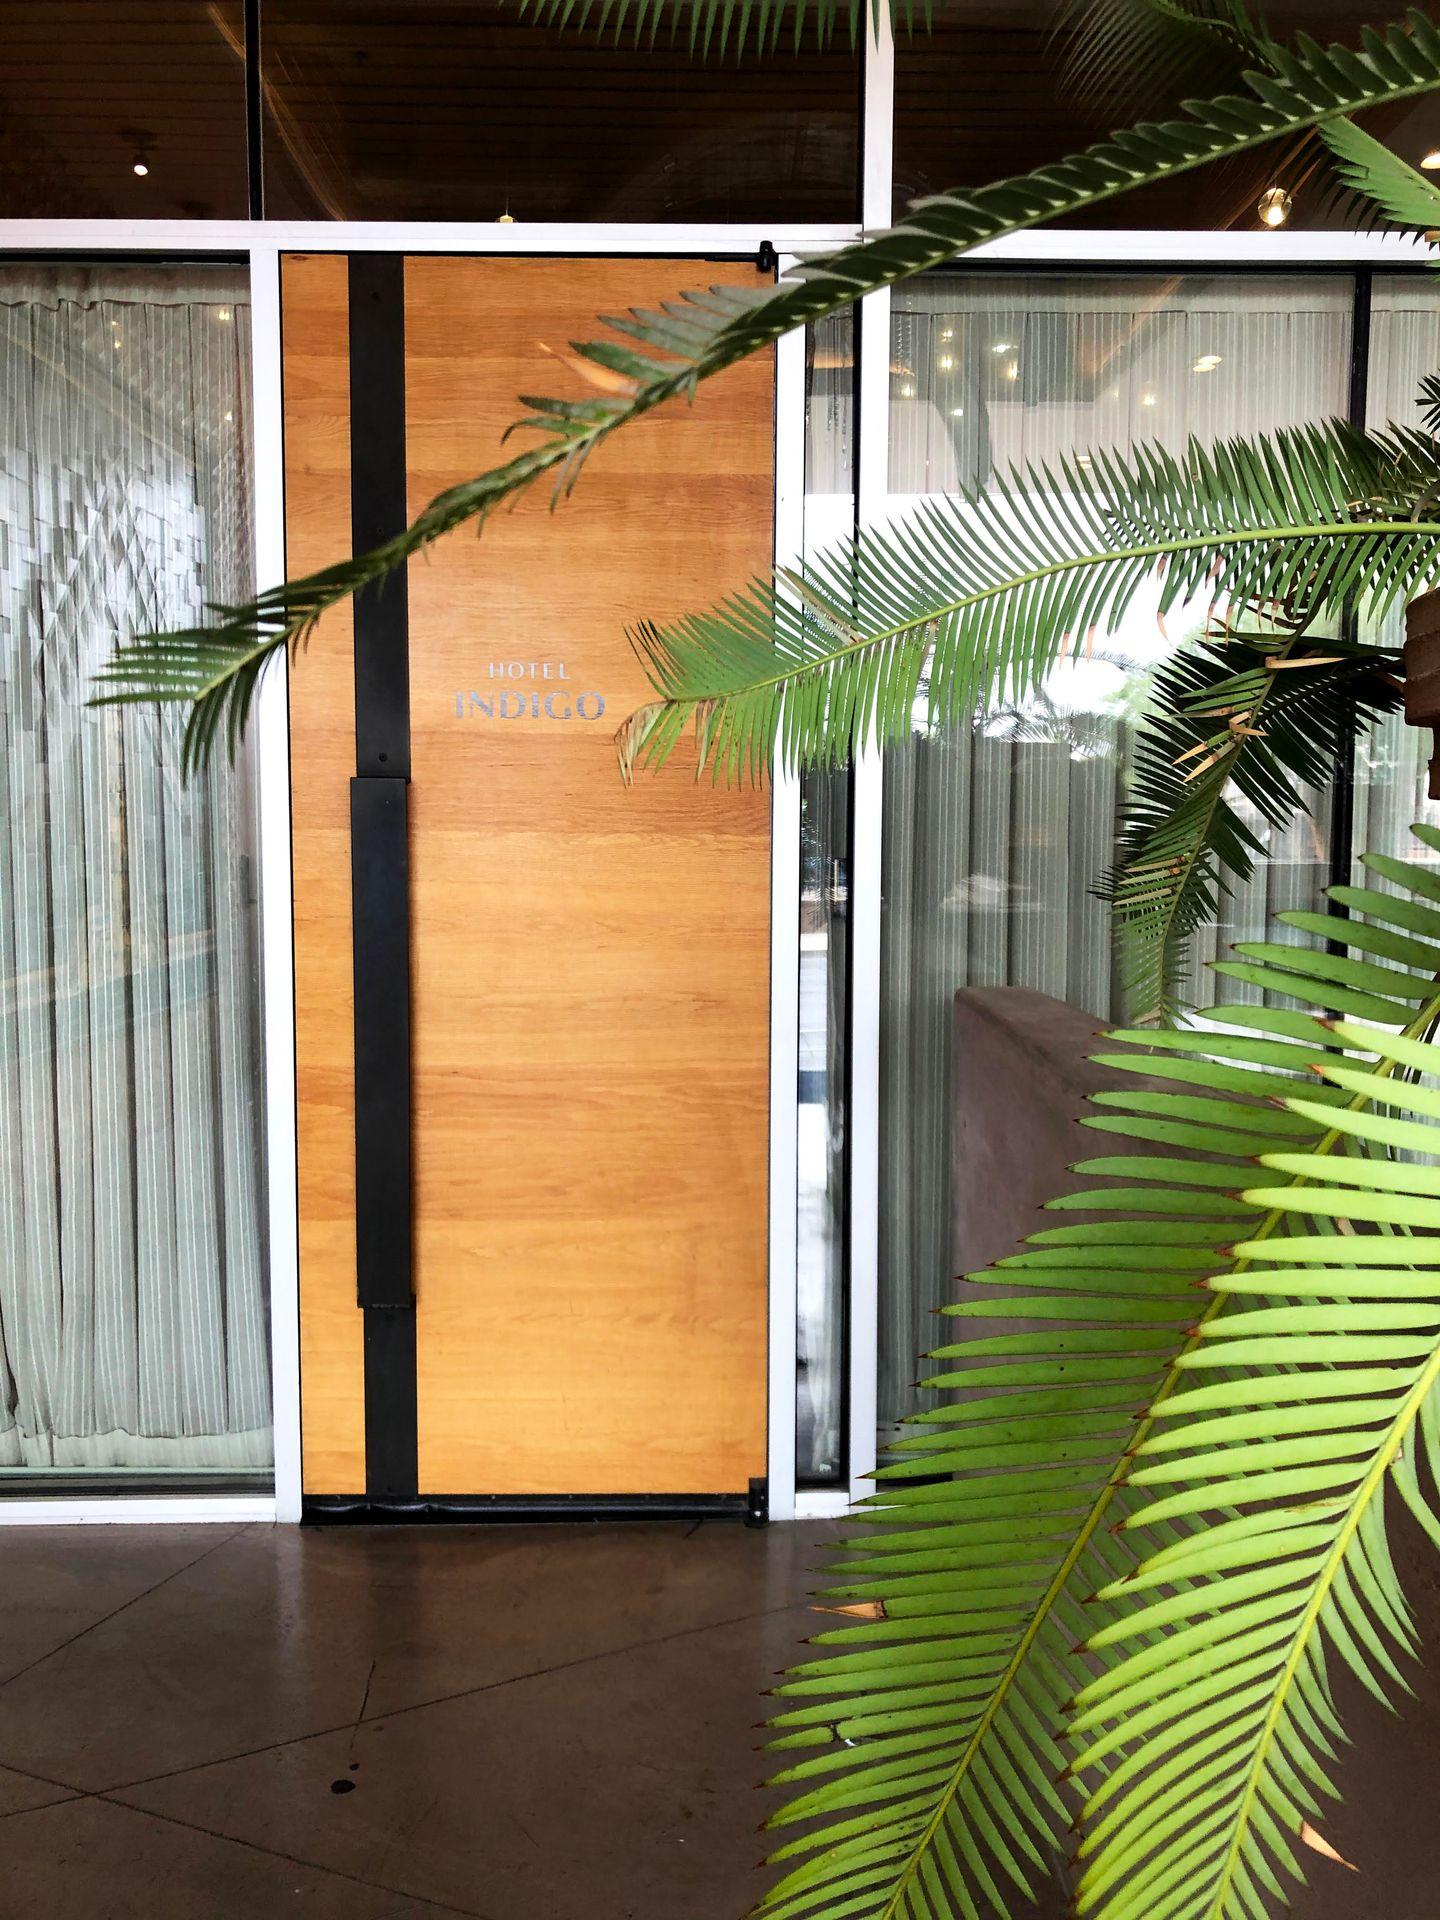 The entrance to Hotel Indigo. There is a large green palm in front of the light wood door.